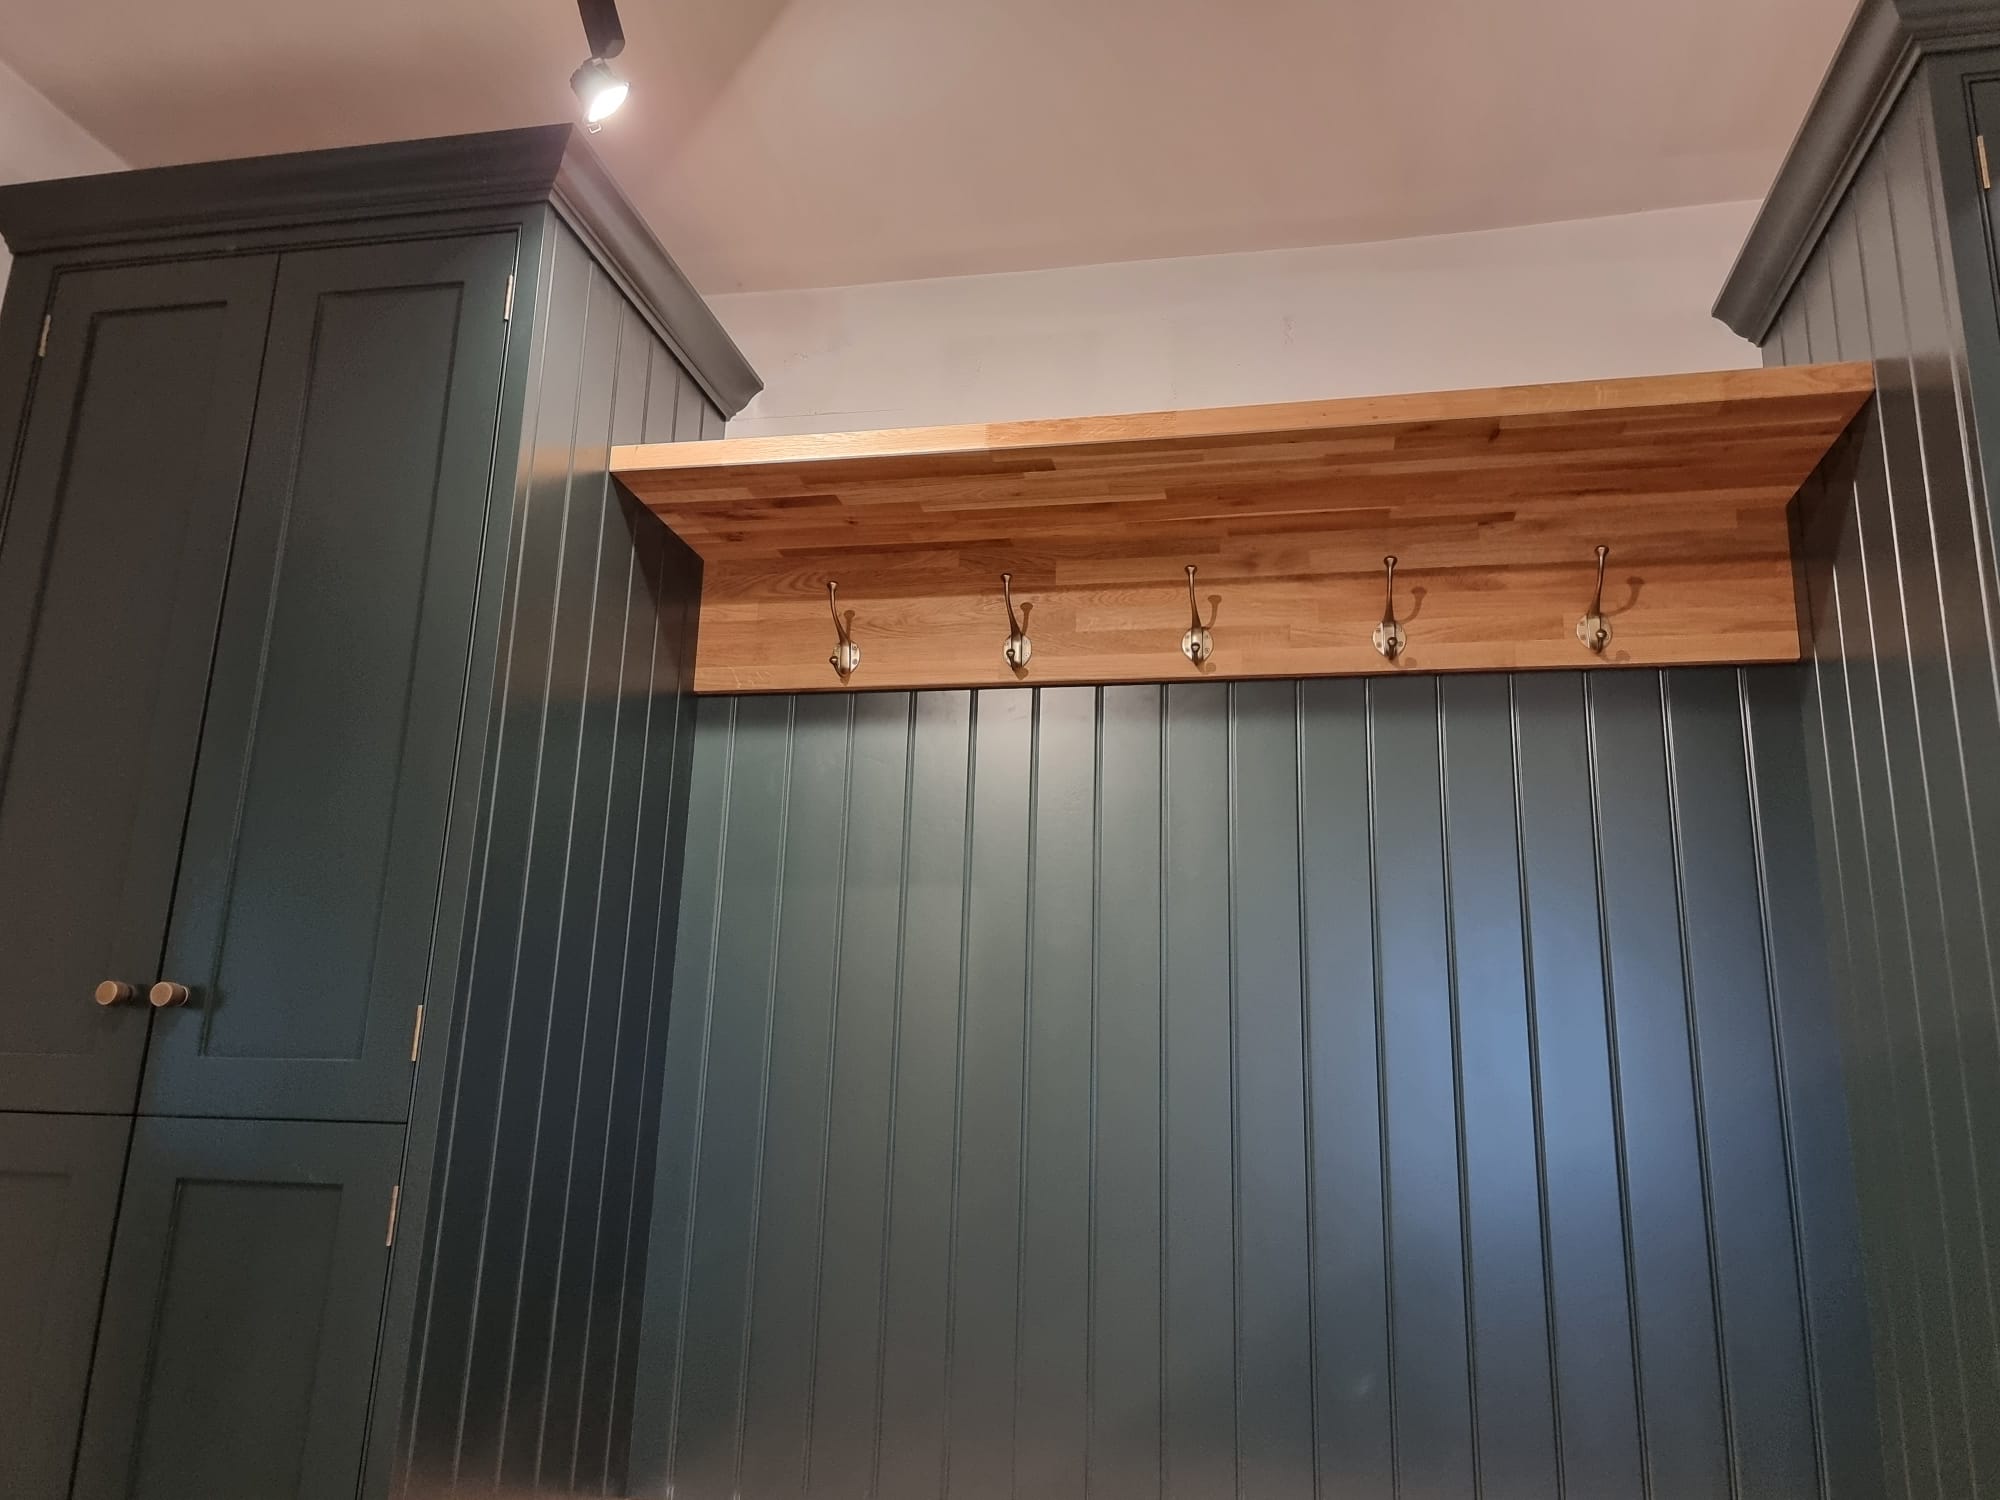 Bespoke timber utility unit by Kings Stag Joinery